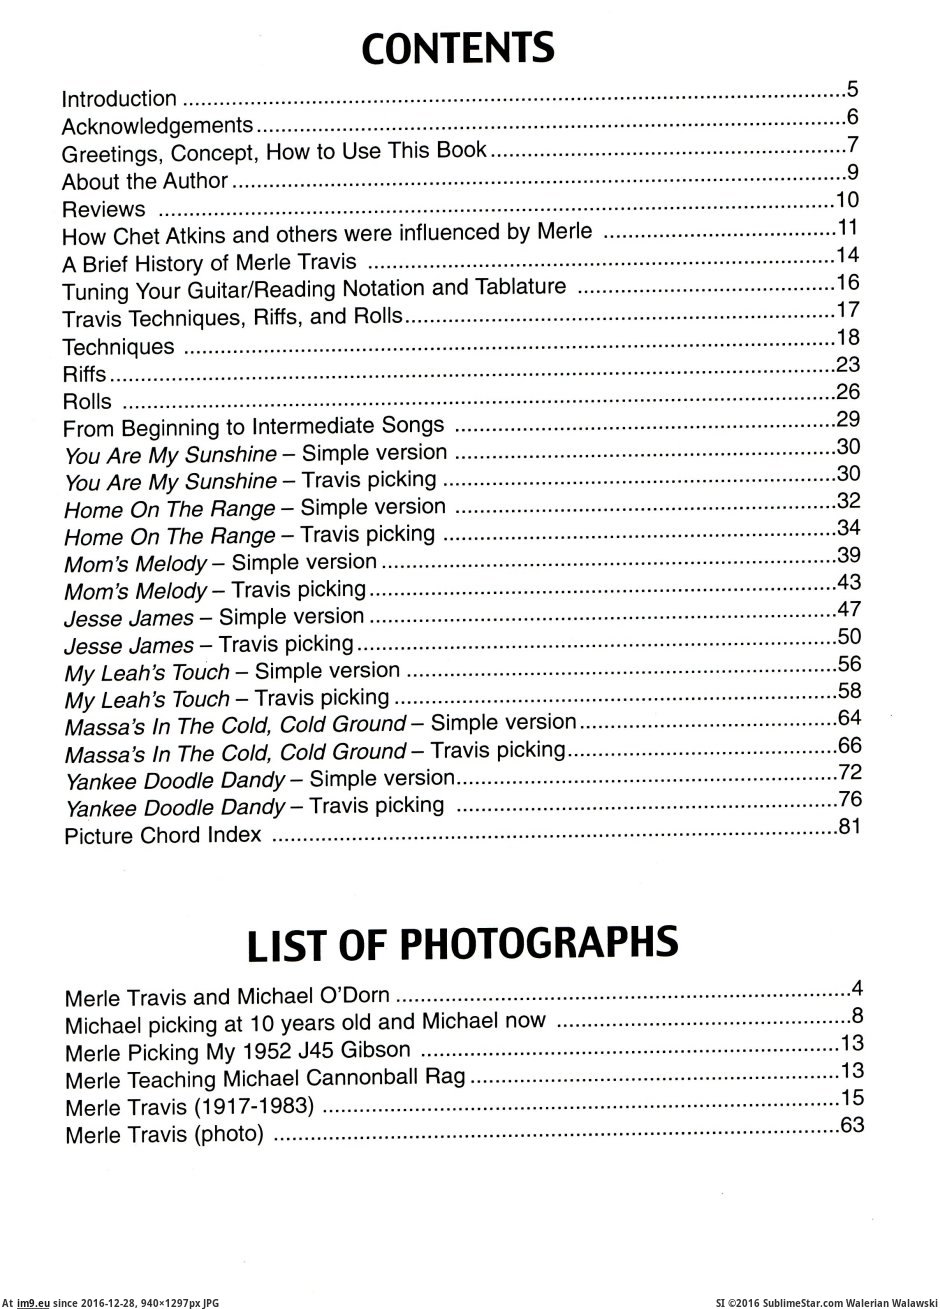 Table of Contents (in Mel Bay's Getting Travis Picking-Photo Storage)